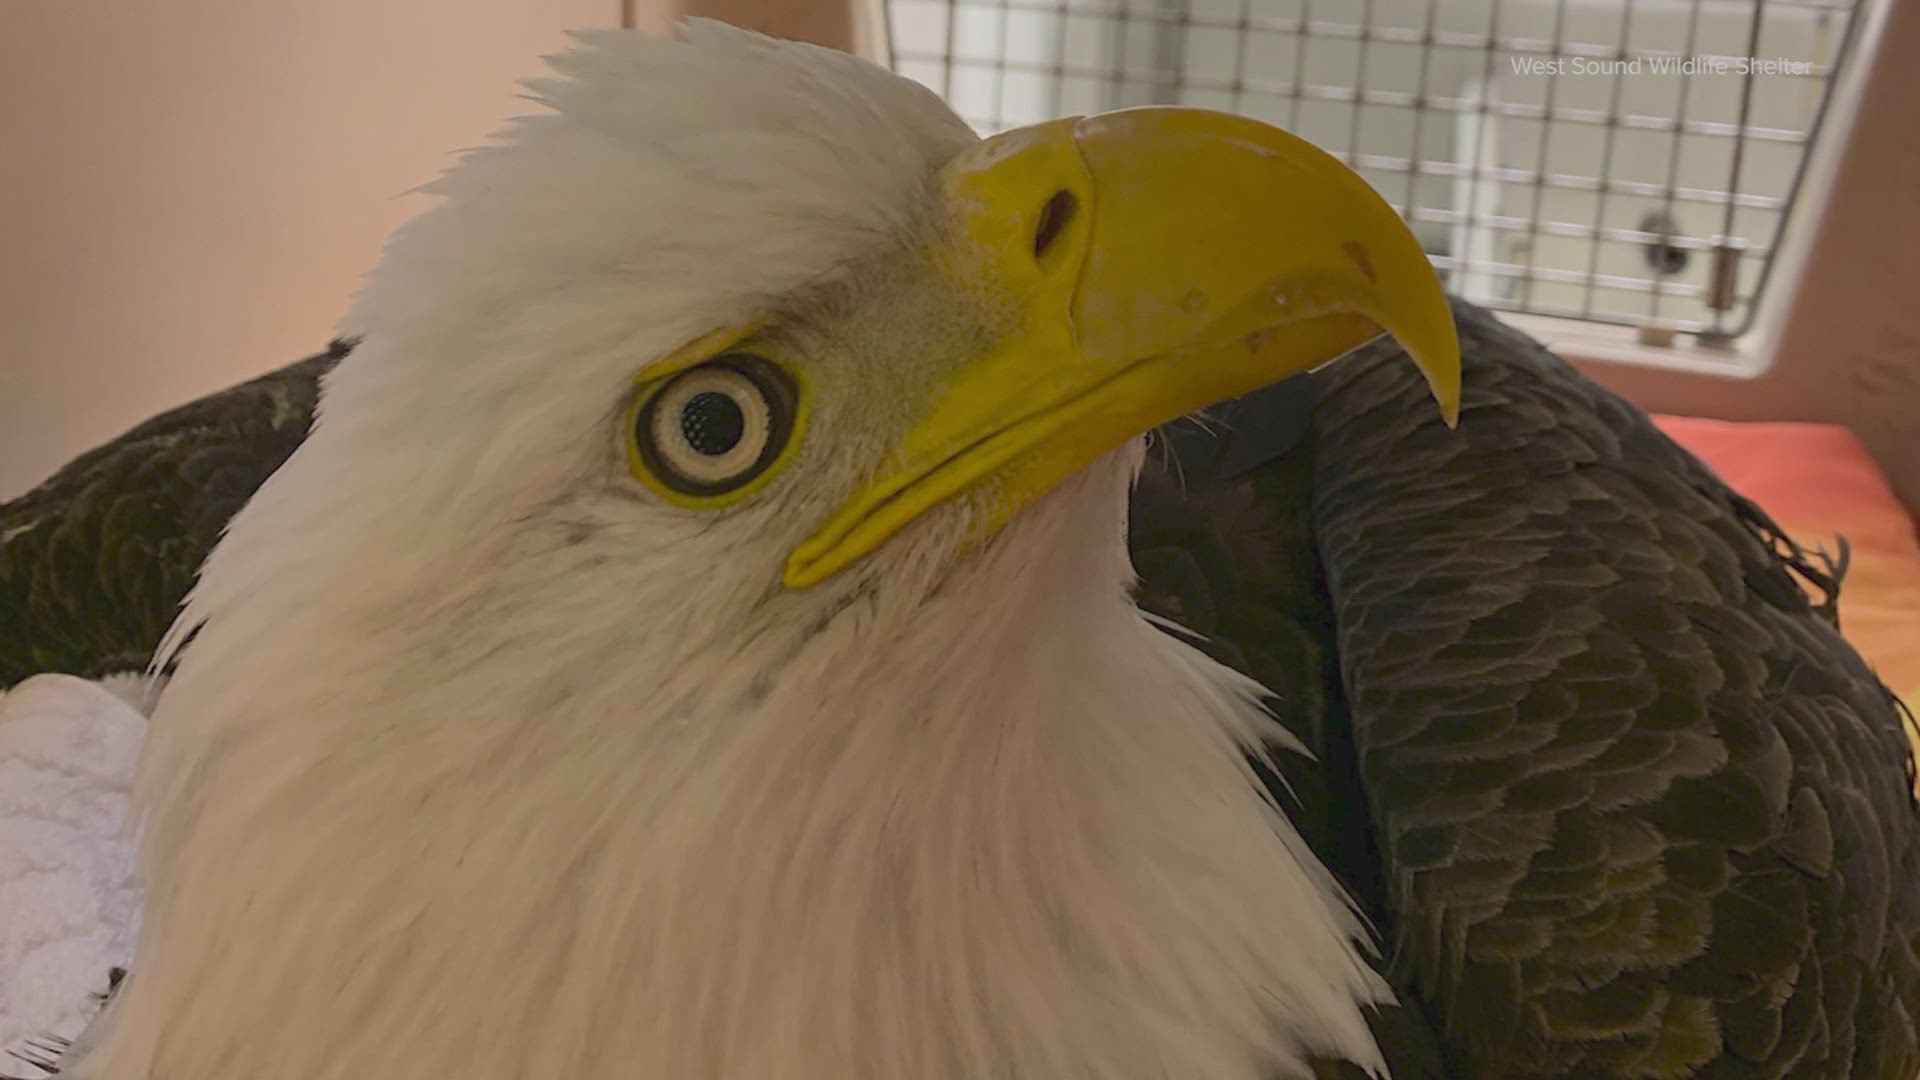 Eagle numbers have quadrupled in the last decade, raising the potential for harmful encounters with people.